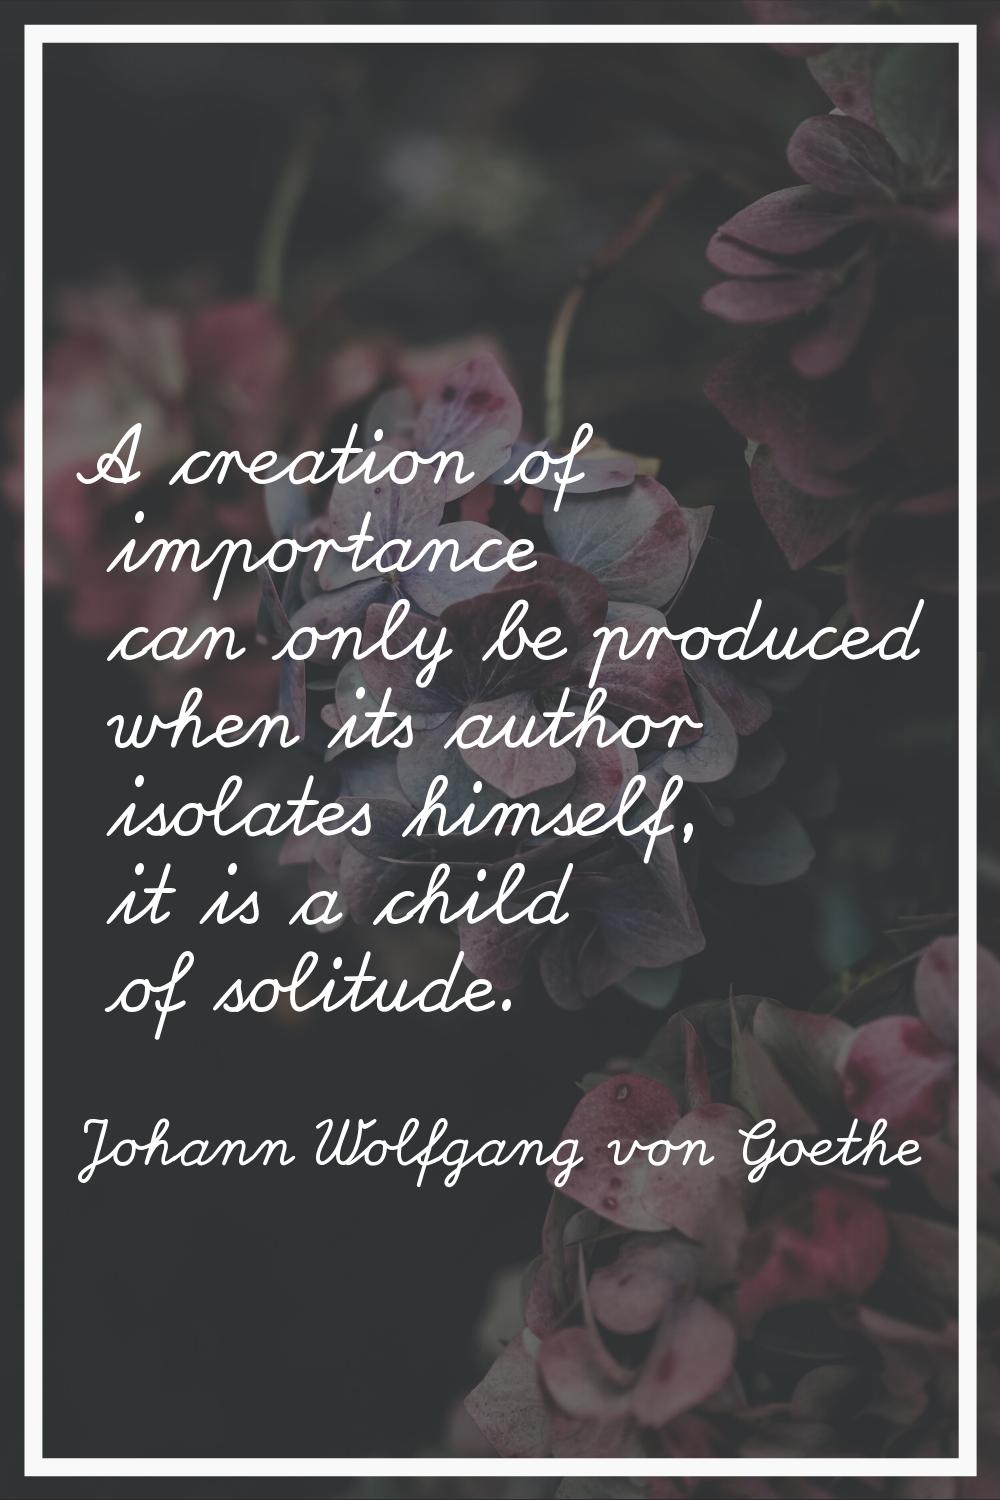 A creation of importance can only be produced when its author isolates himself, it is a child of so